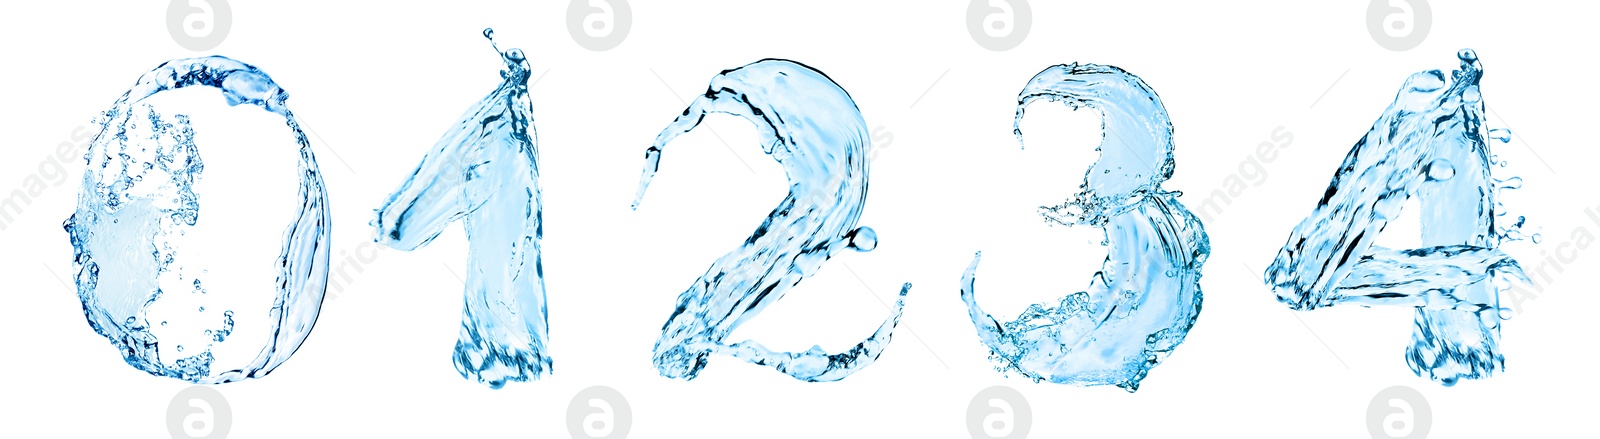 Illustration of Numbers made of water on white background, collage design